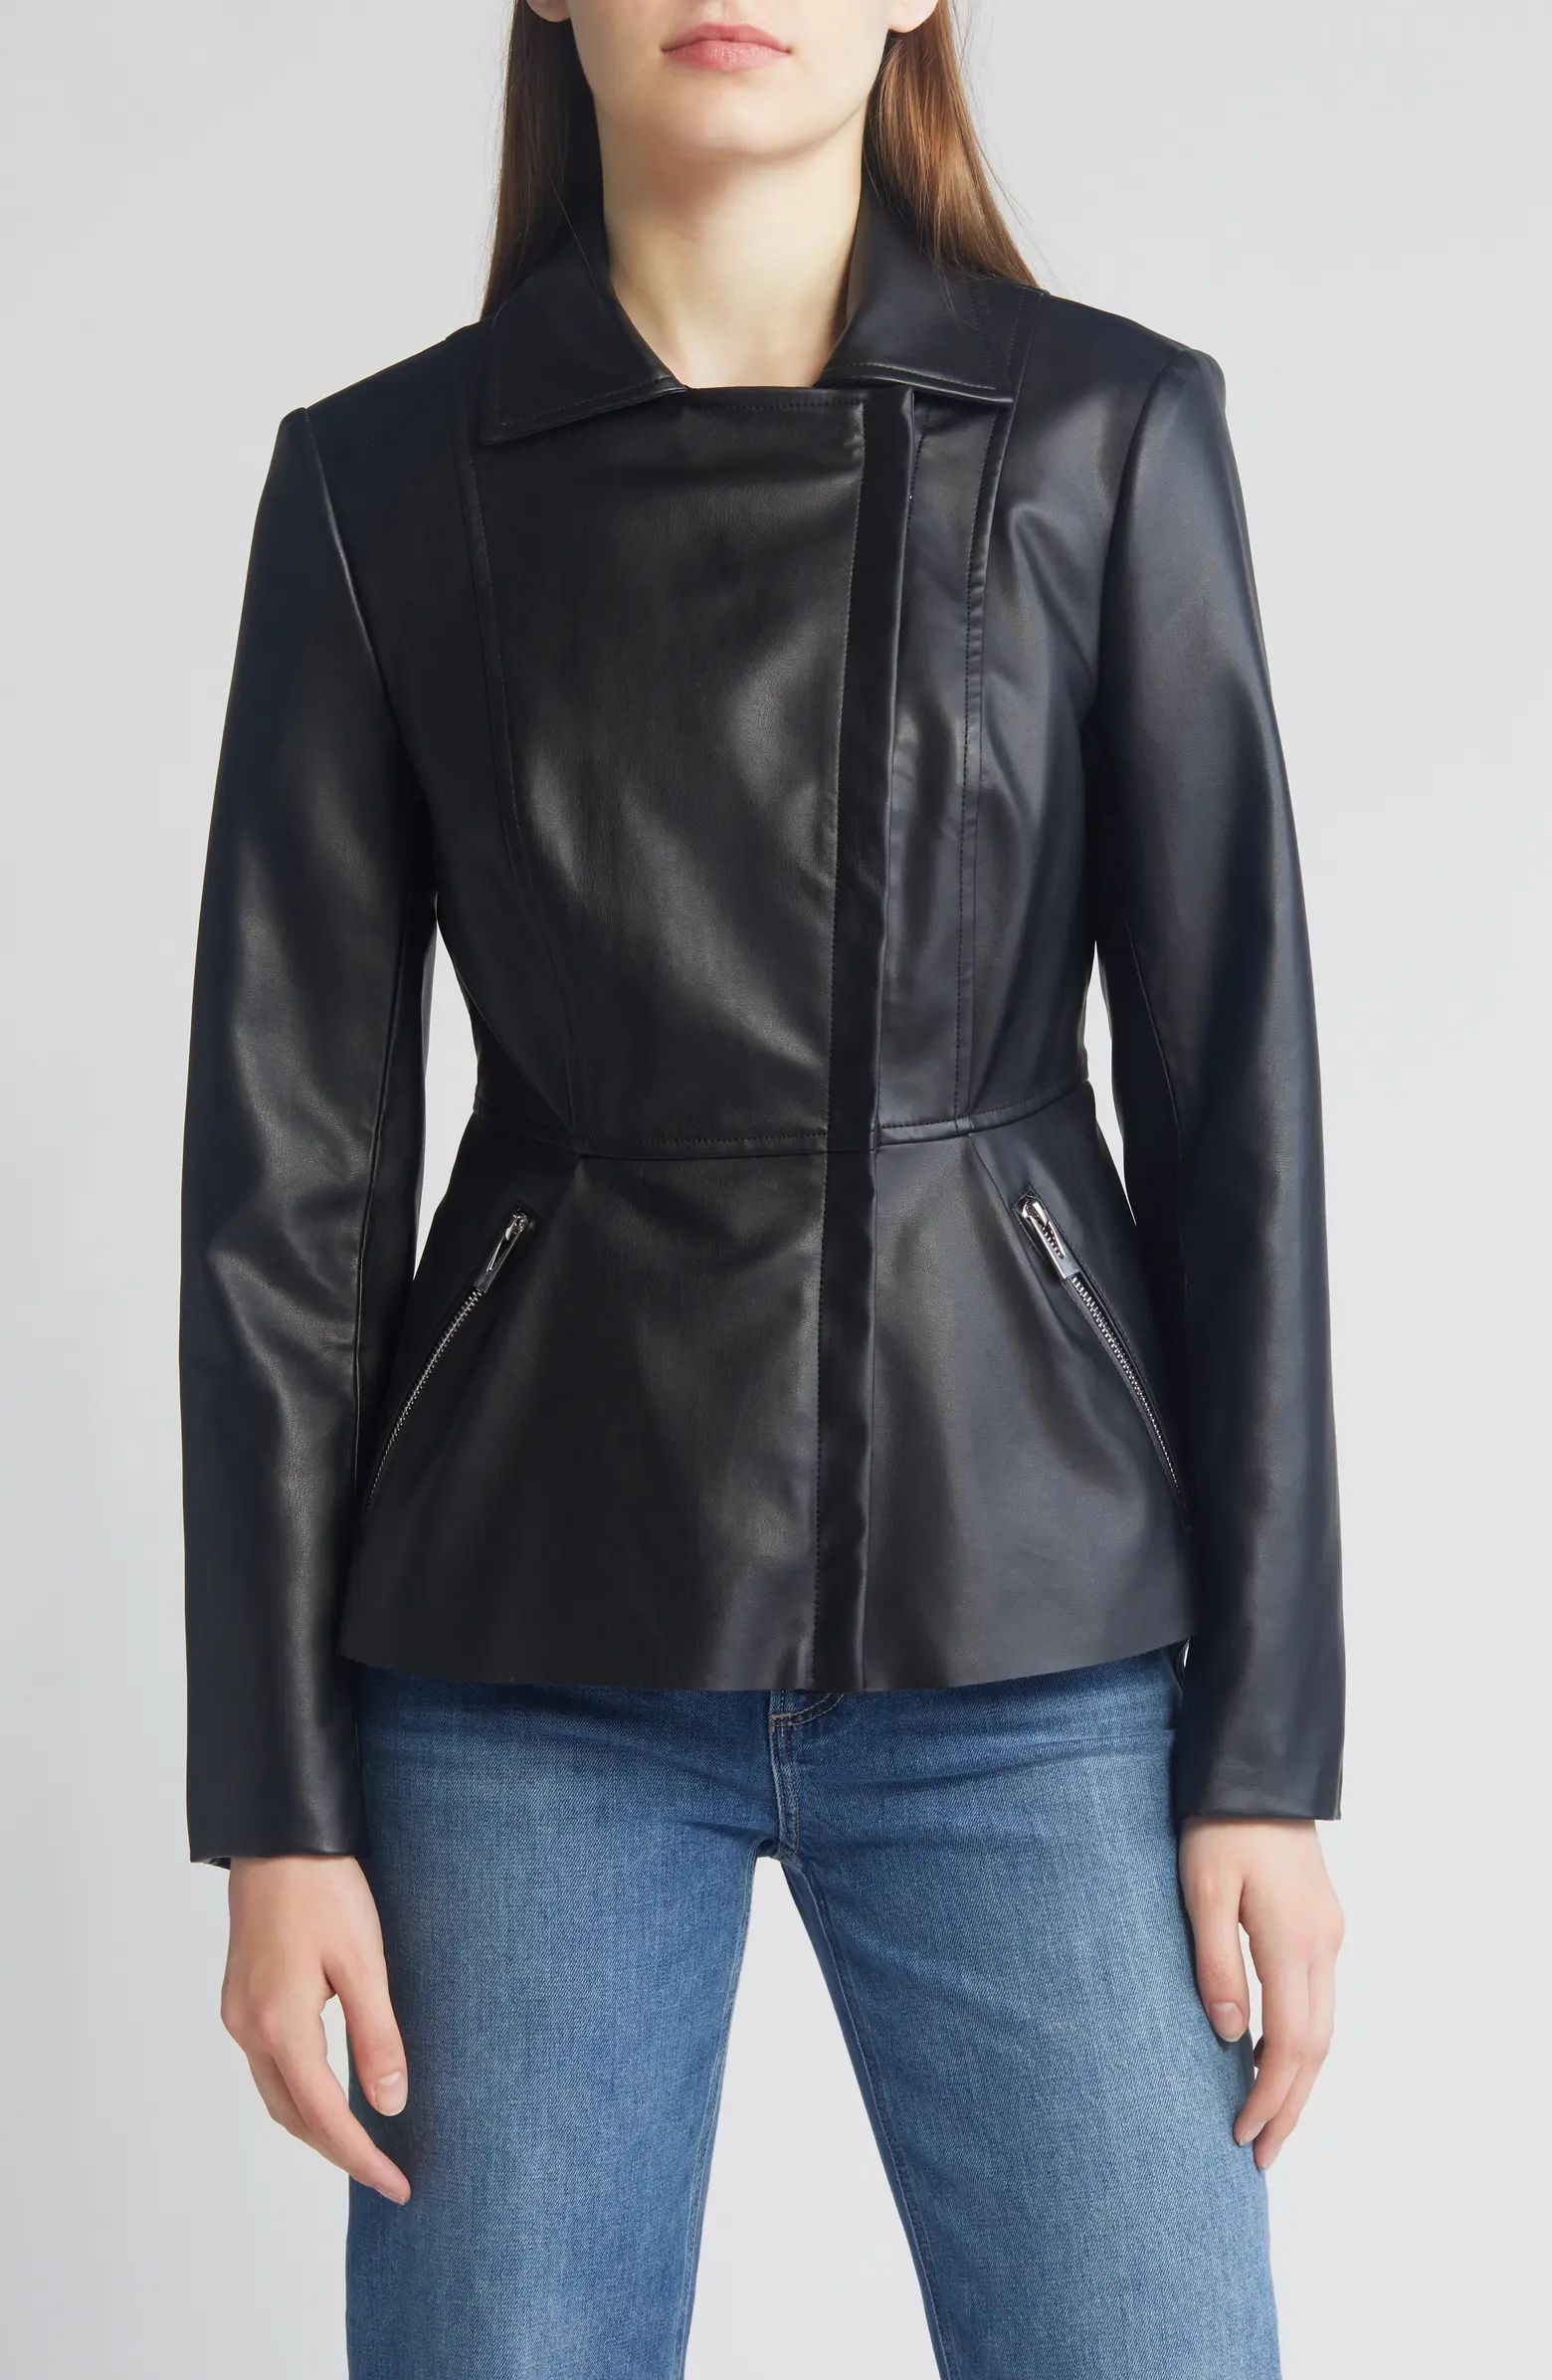 Peplum Faux Leather Jacket | Nordstrom